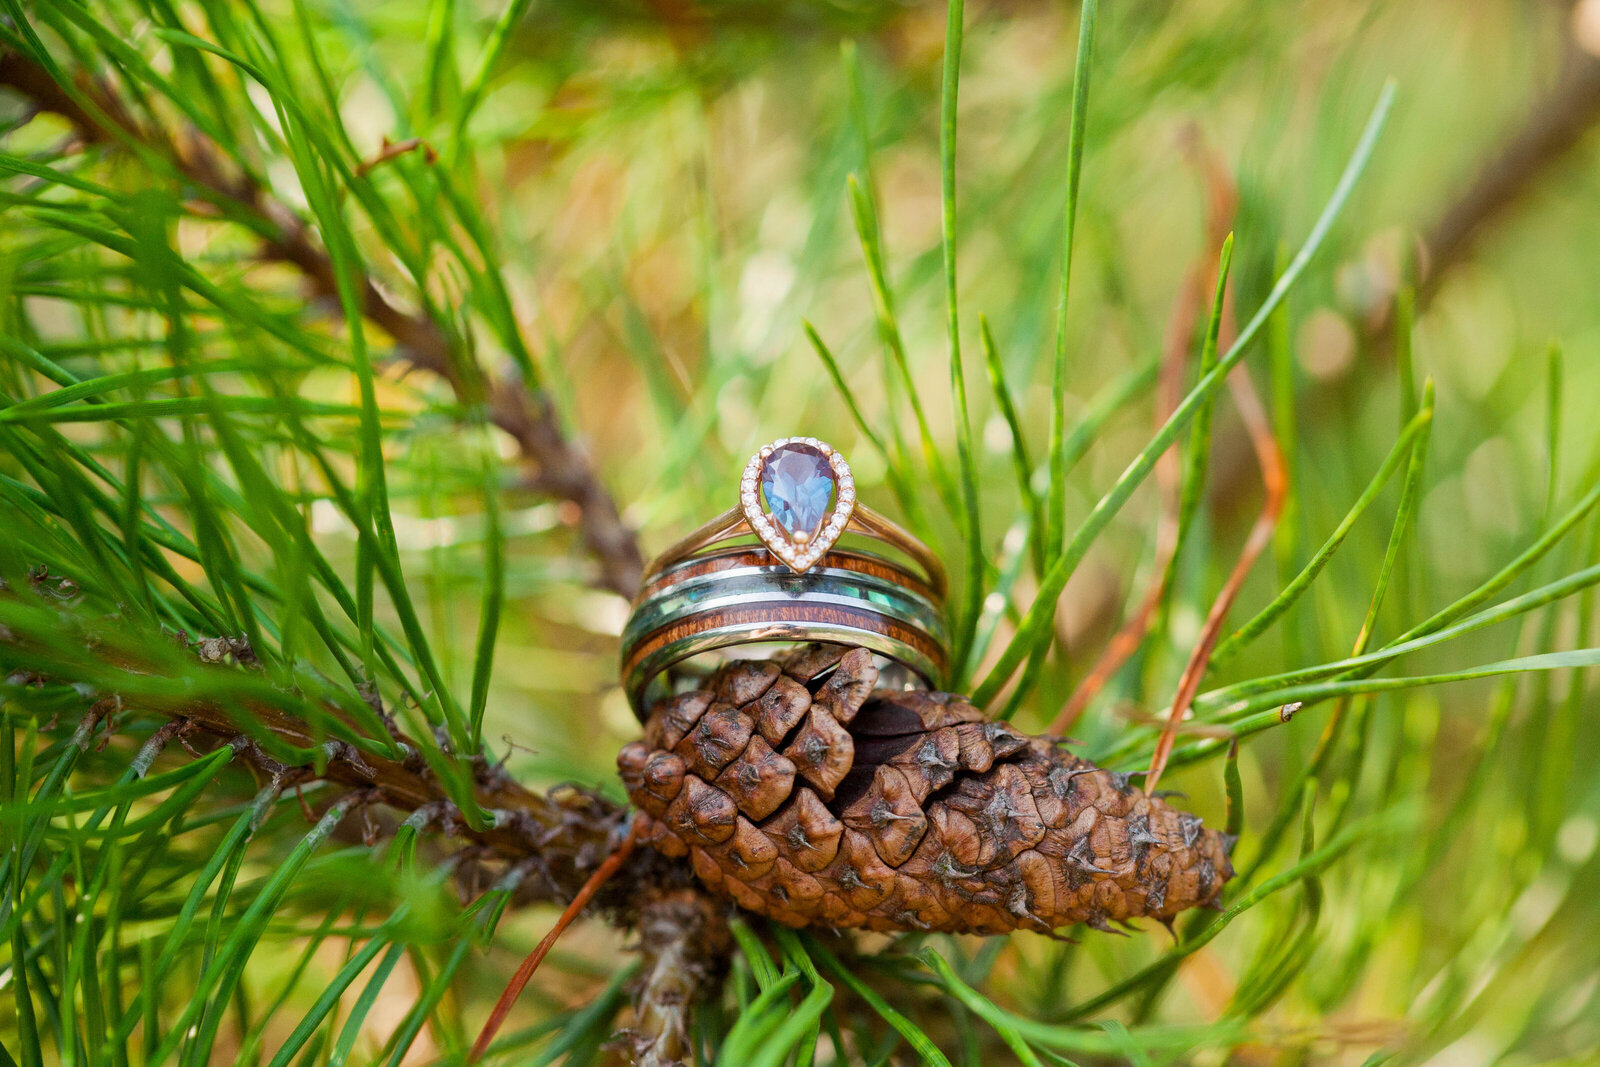 Rings on Pinecones